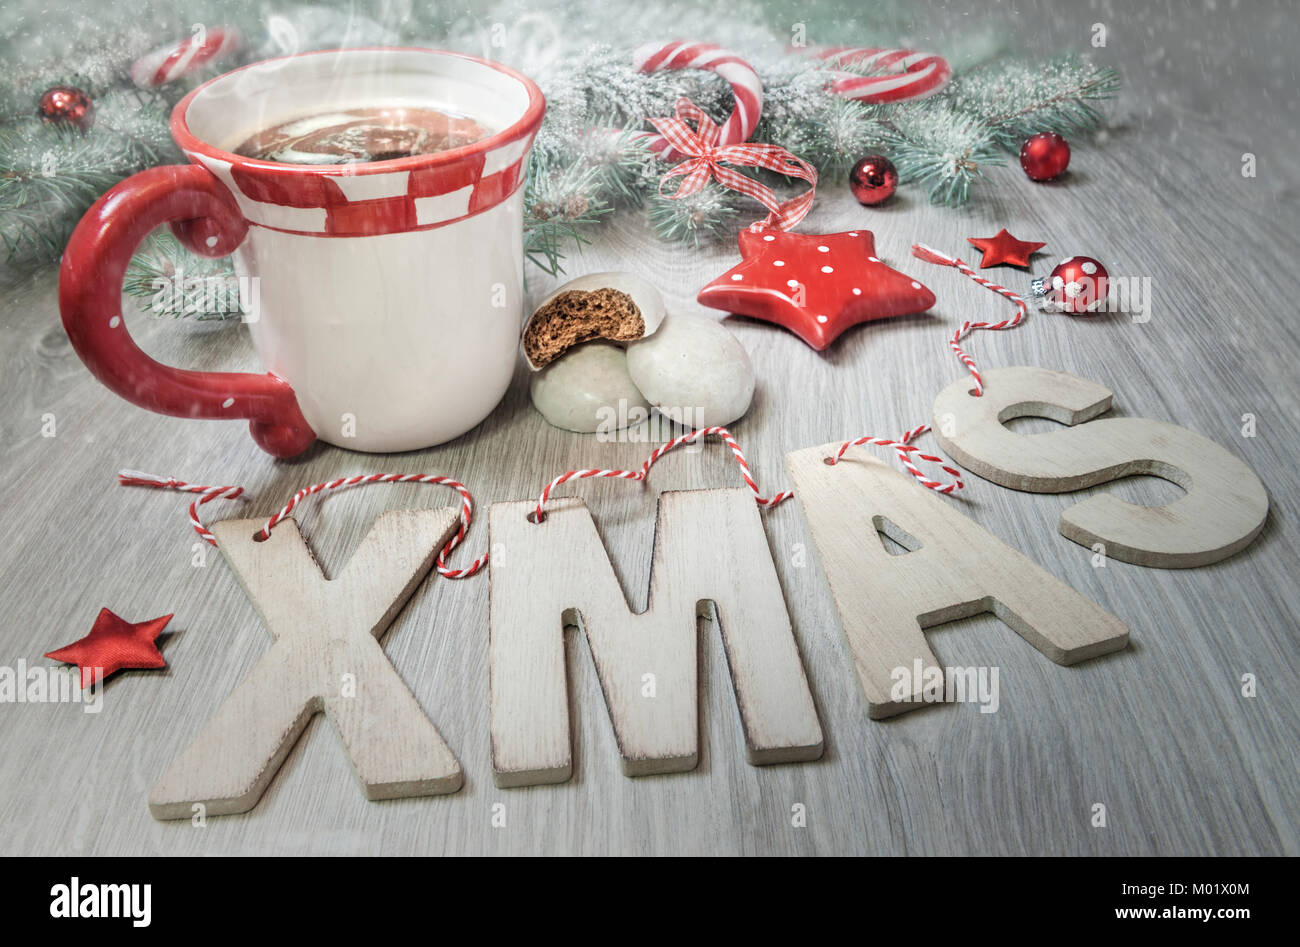 Wooden letters "Xmas", cup of steaming tea and winter decorations in red and dark green. Merry Christmas! Stock Photo